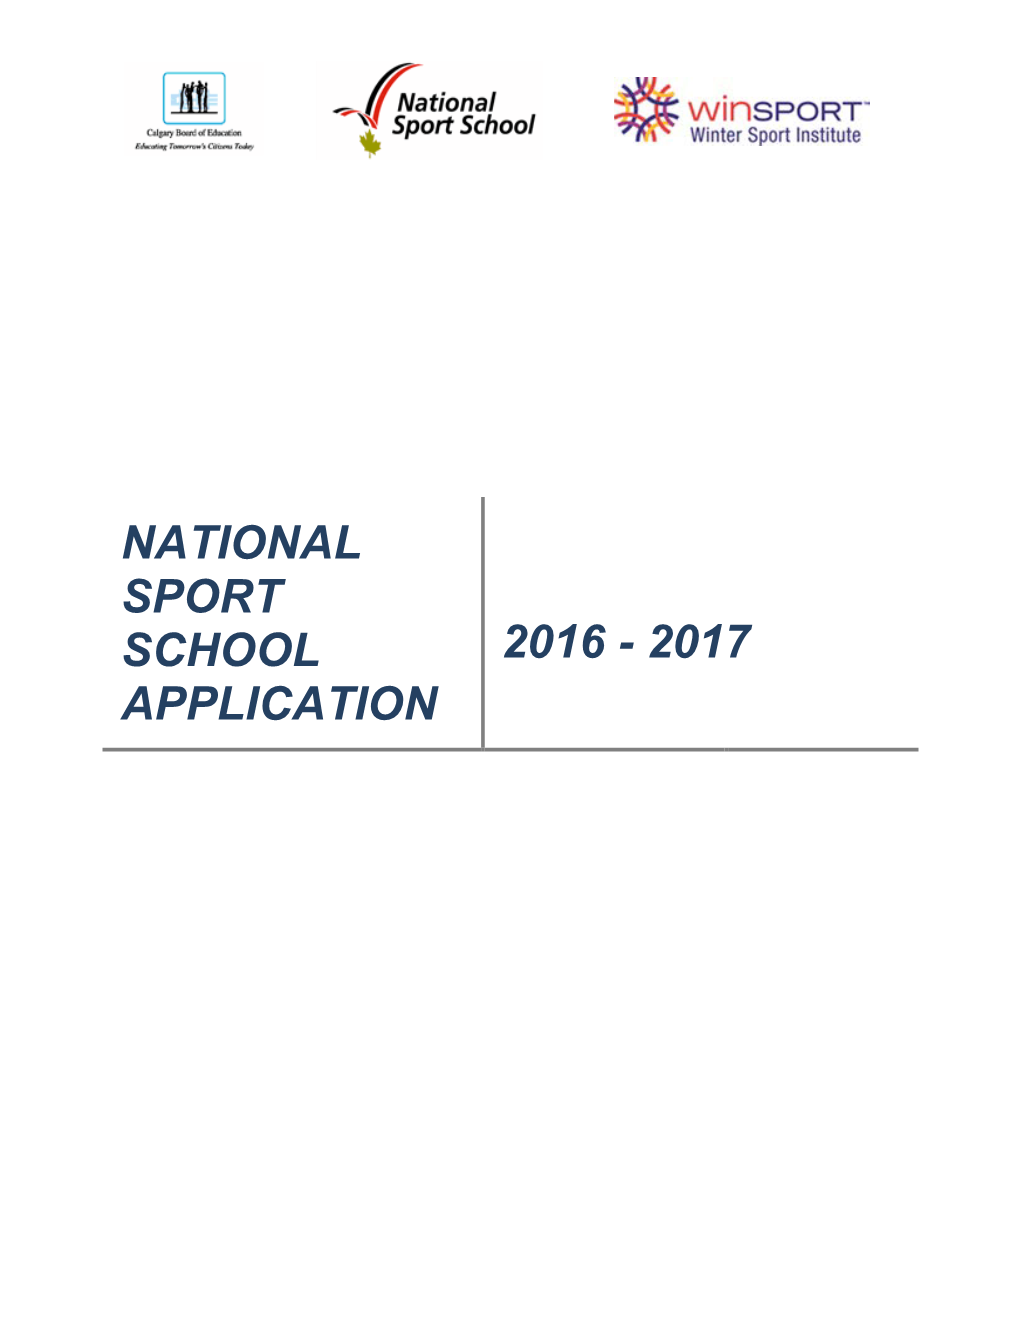 National Sport School Application: Admissions Process